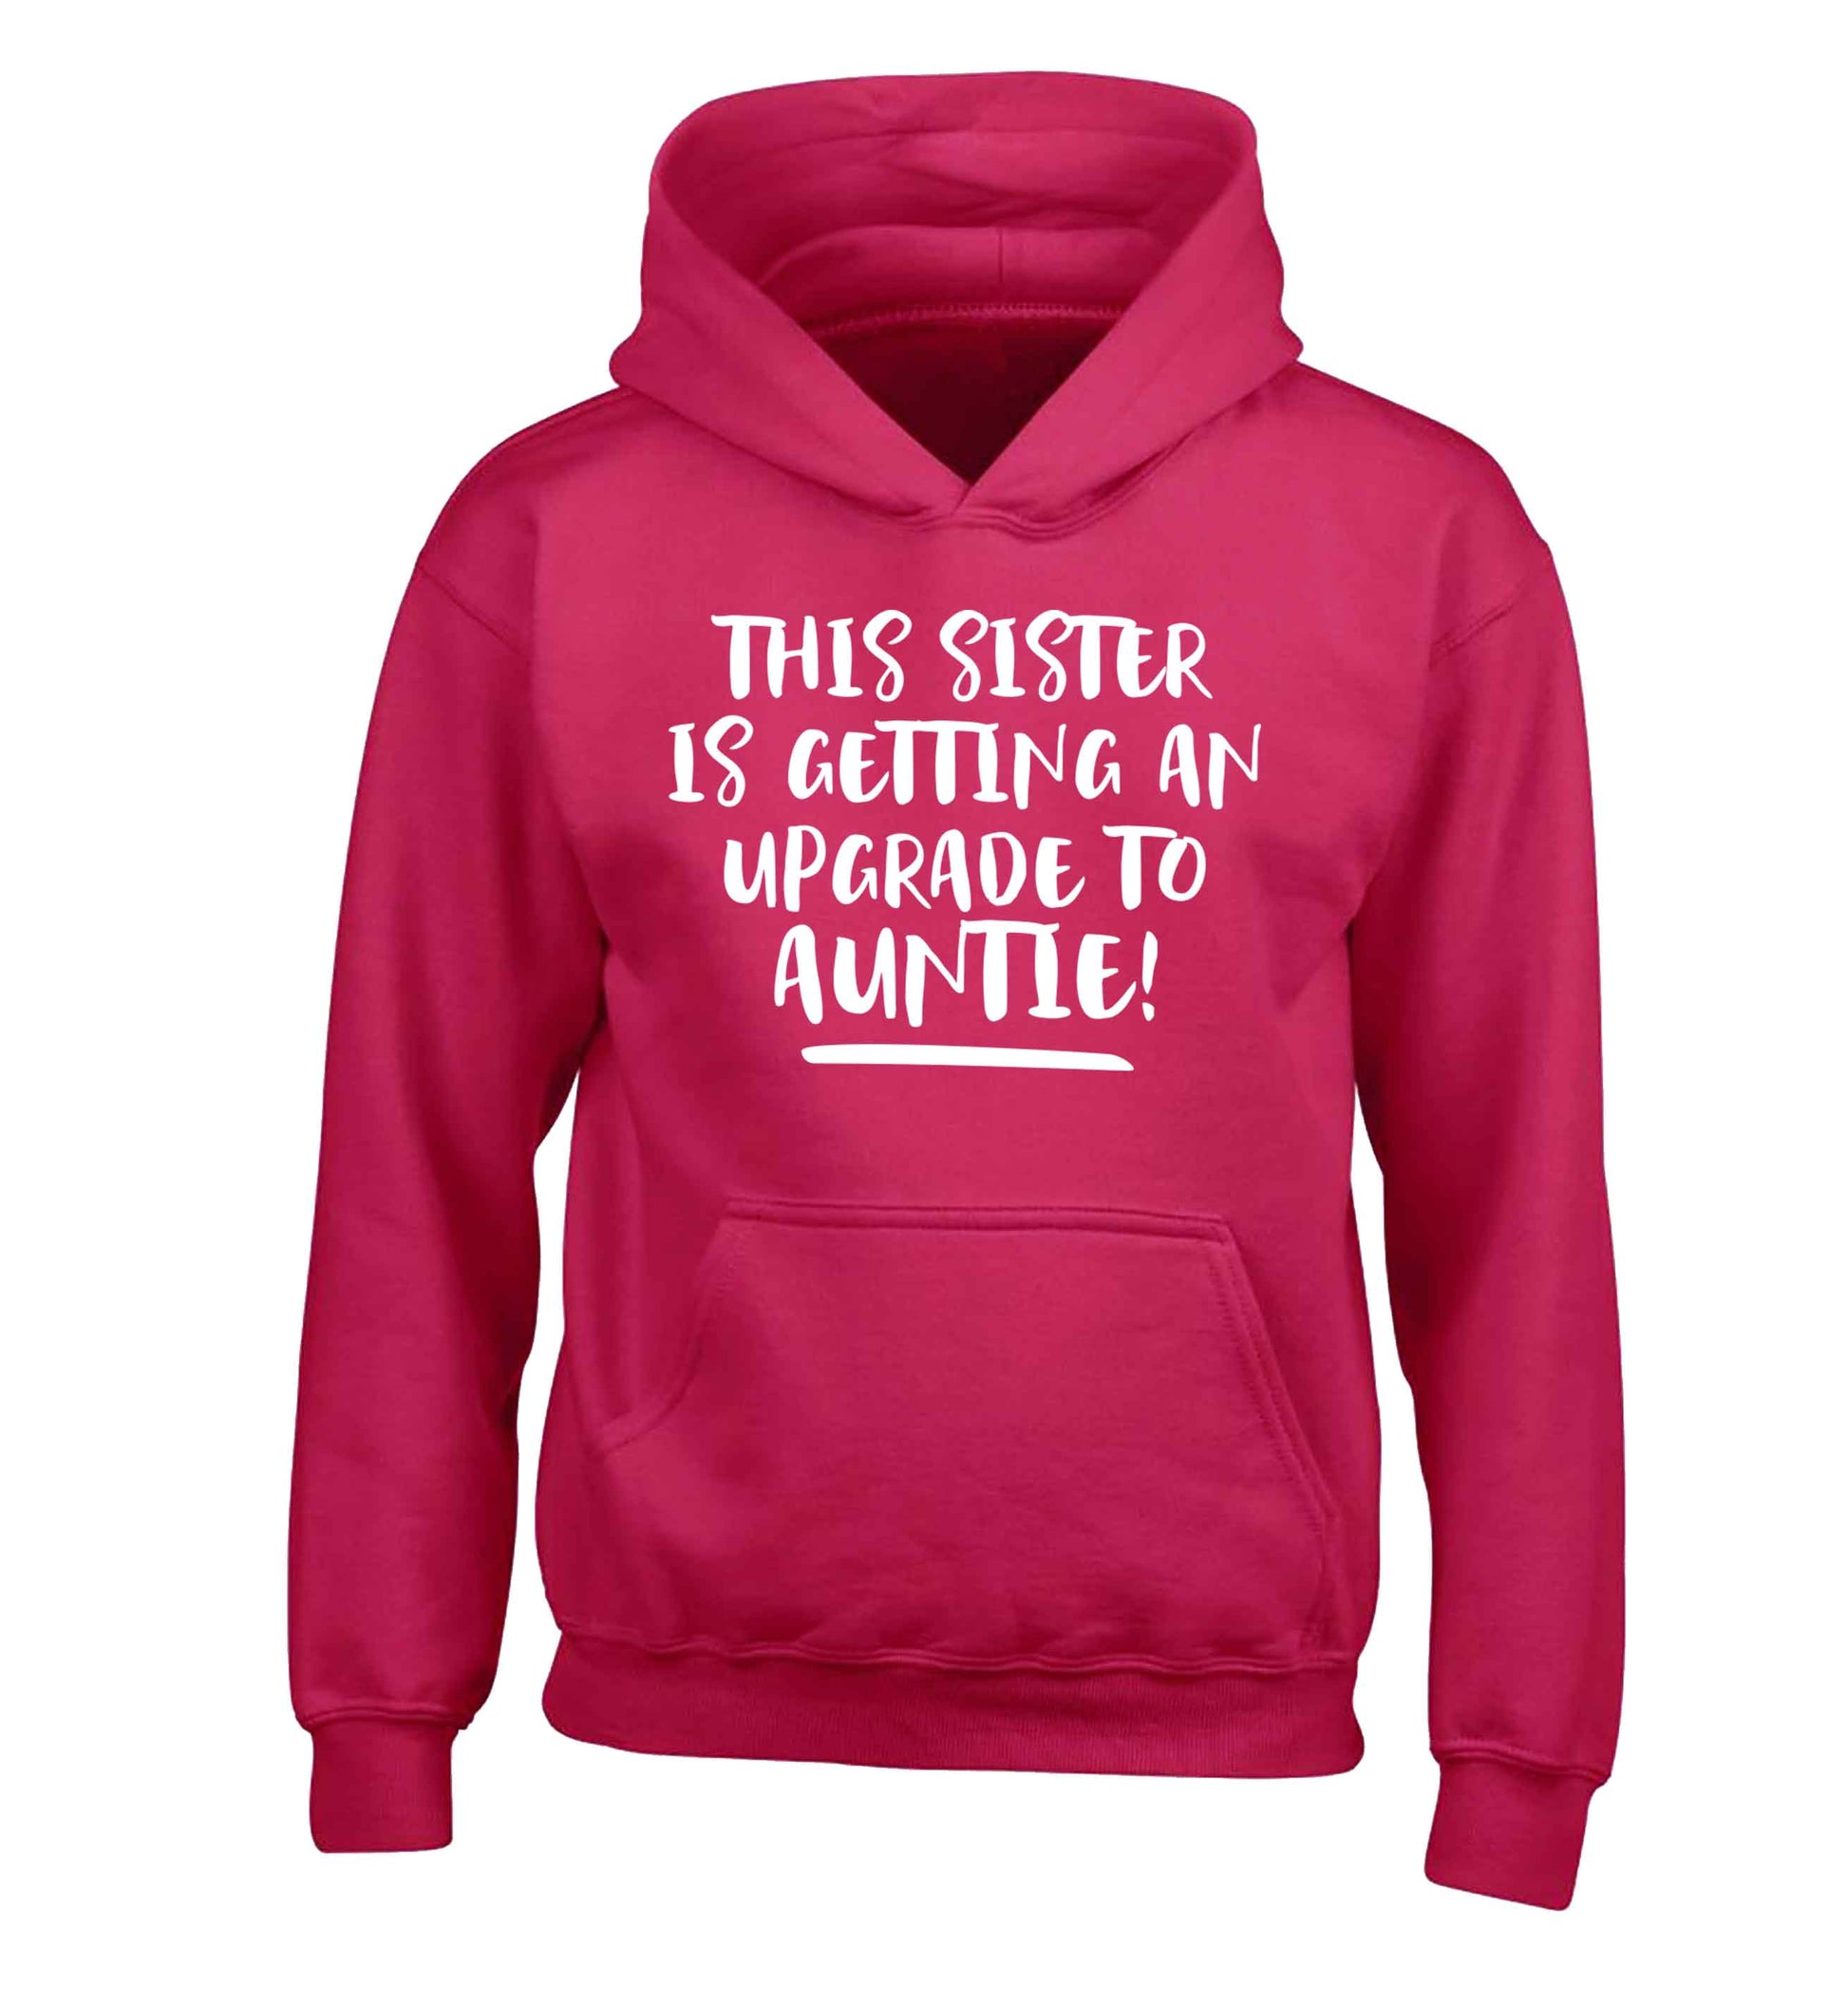 This sister is getting an upgrade to auntie! children's pink hoodie 12-13 Years